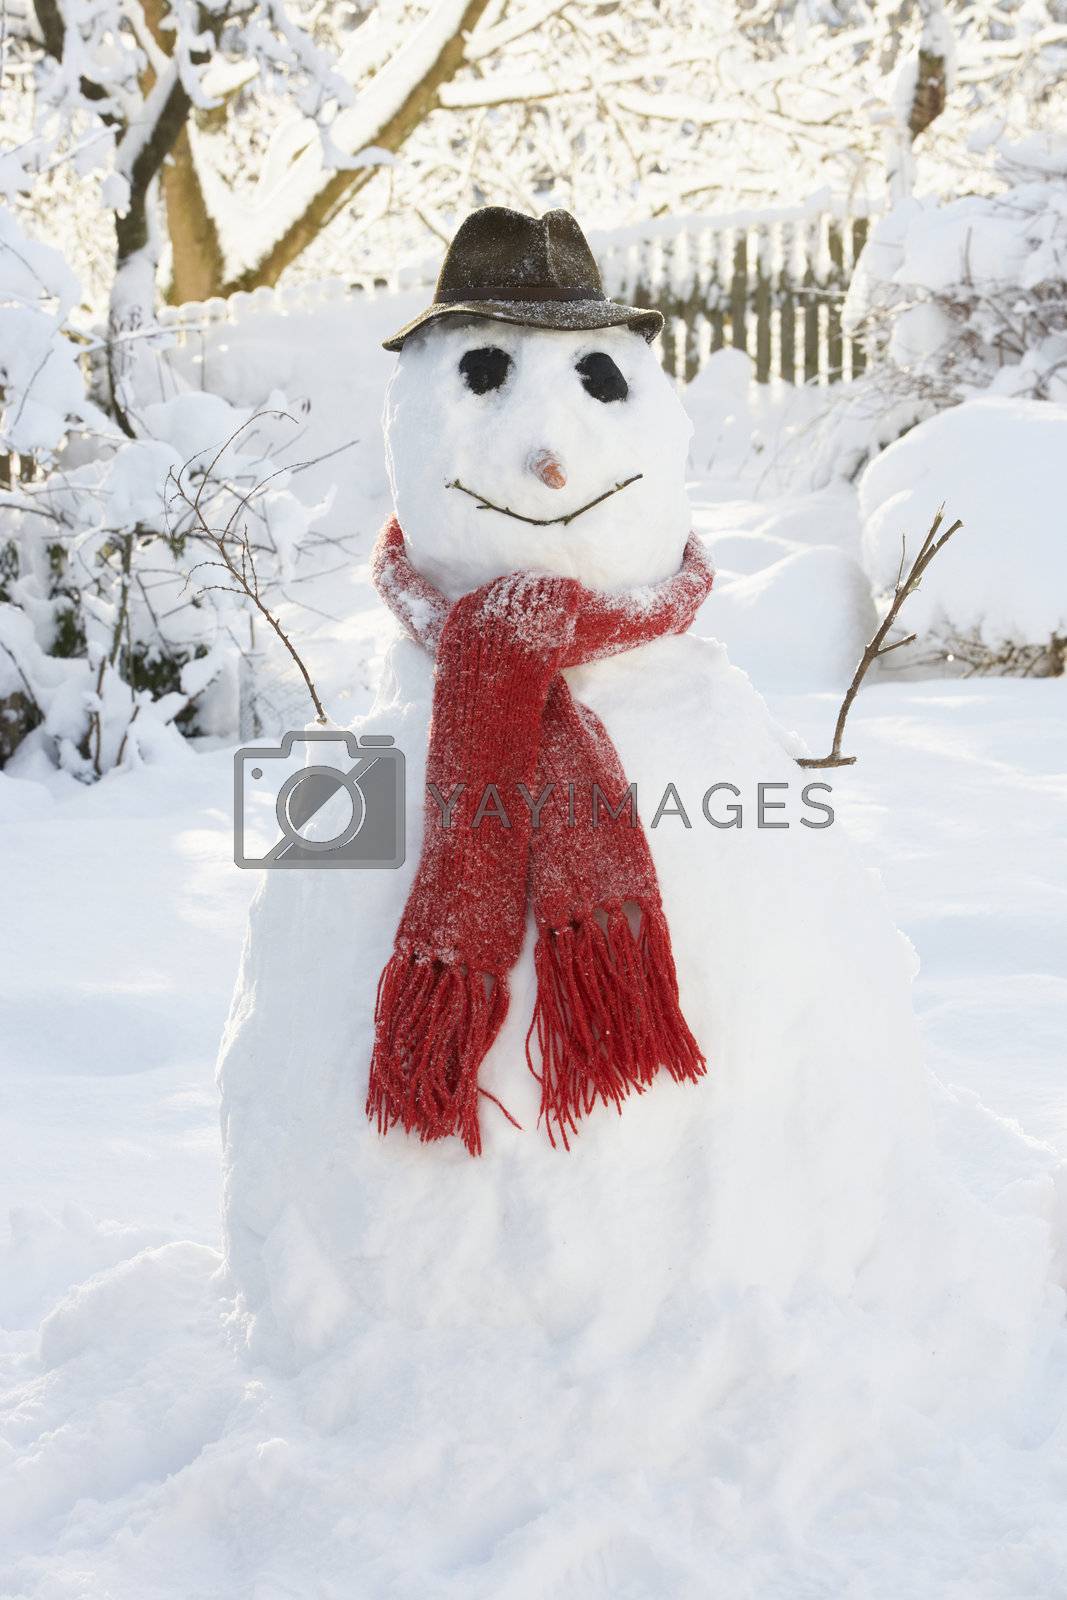 Royalty free image of Snowman In Garden by omg_images